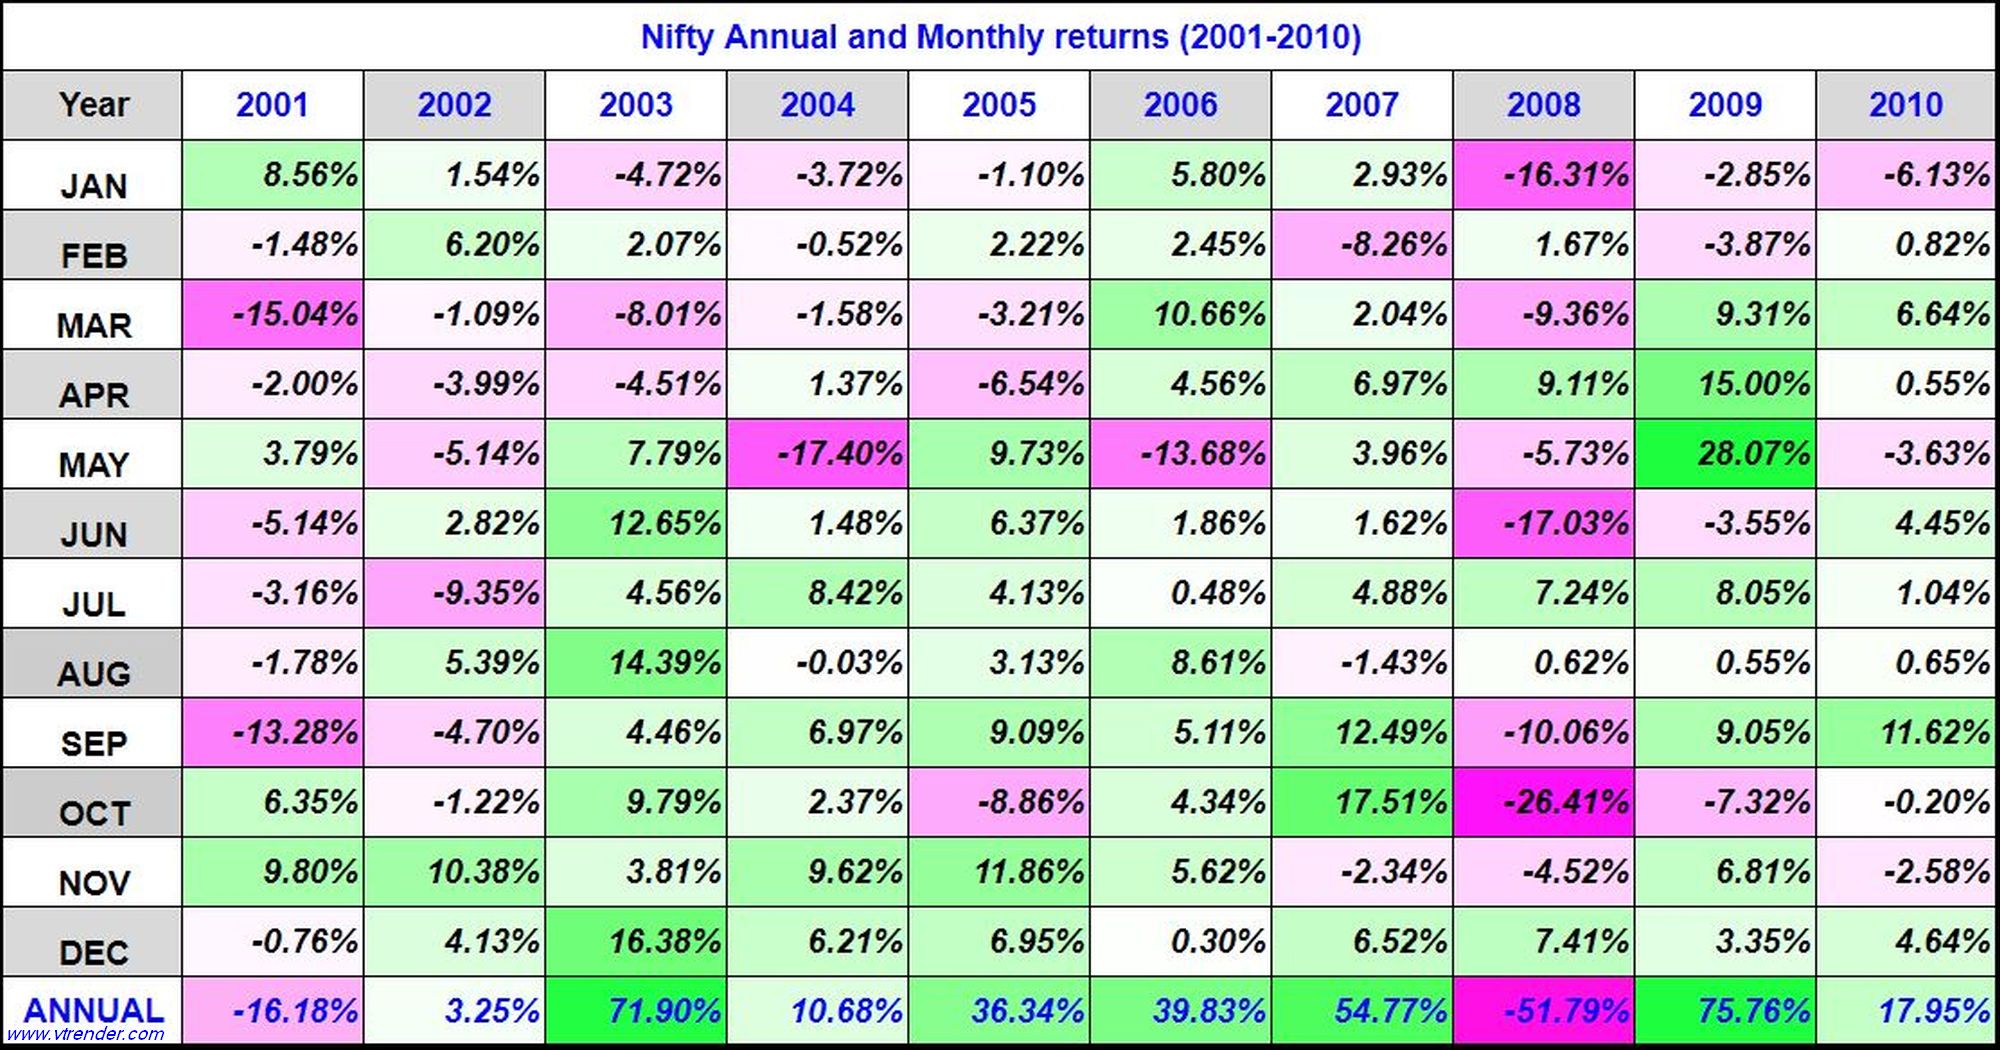 Niftyreturns2001 2010 Nifty 50 Monthly And Annual Returns (1991-2022) - 30Th Jun 2022 Annual, Monthly, Nifty Returns